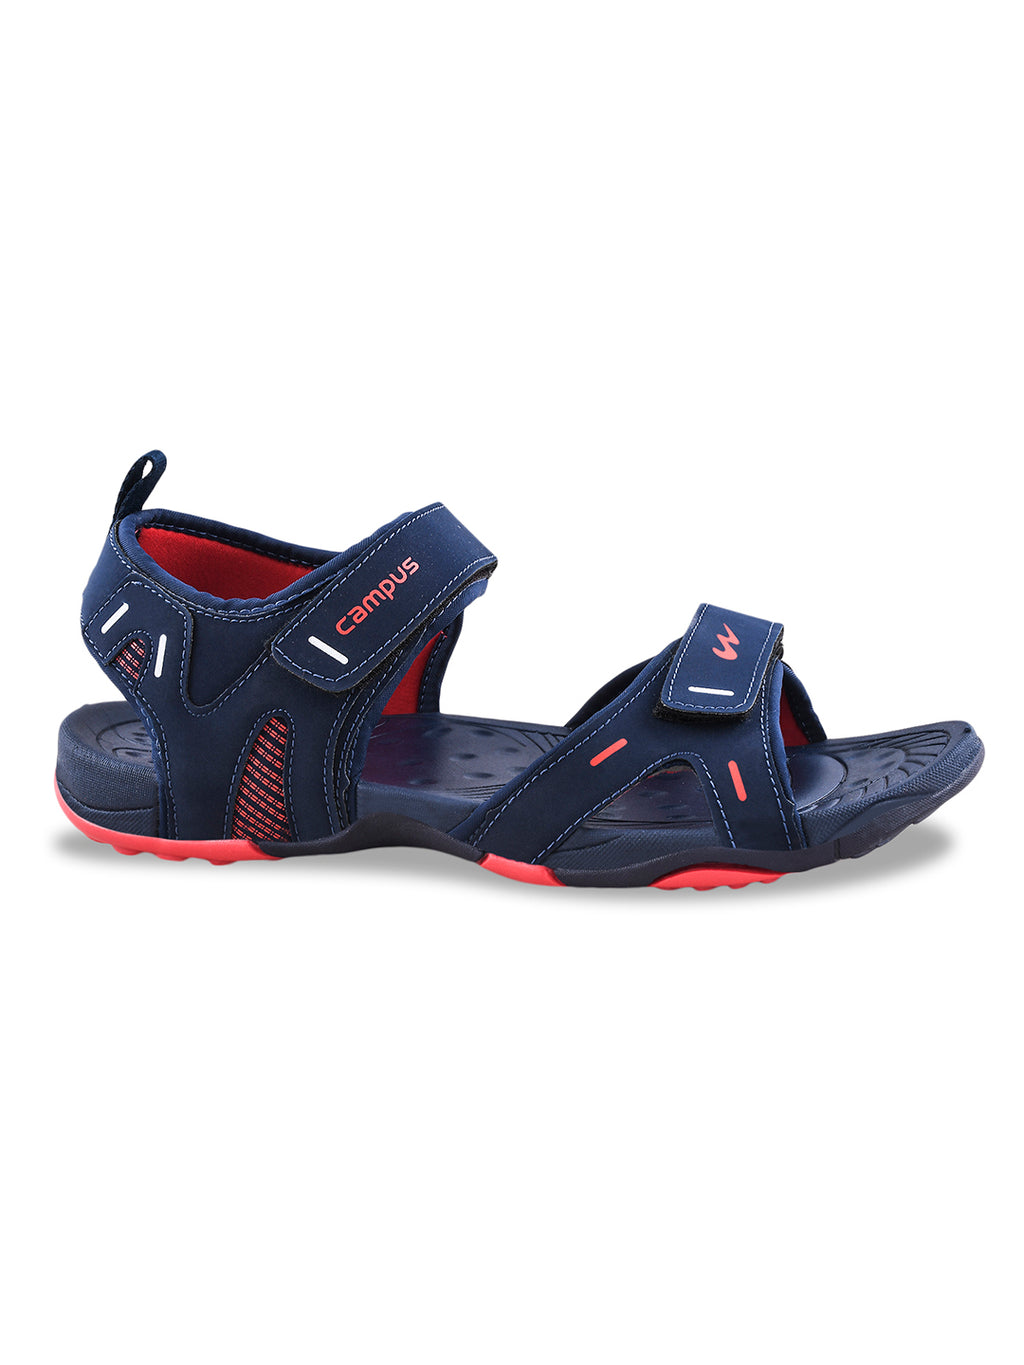 Buy Red Sandals for Men by Campus Online | Ajio.com